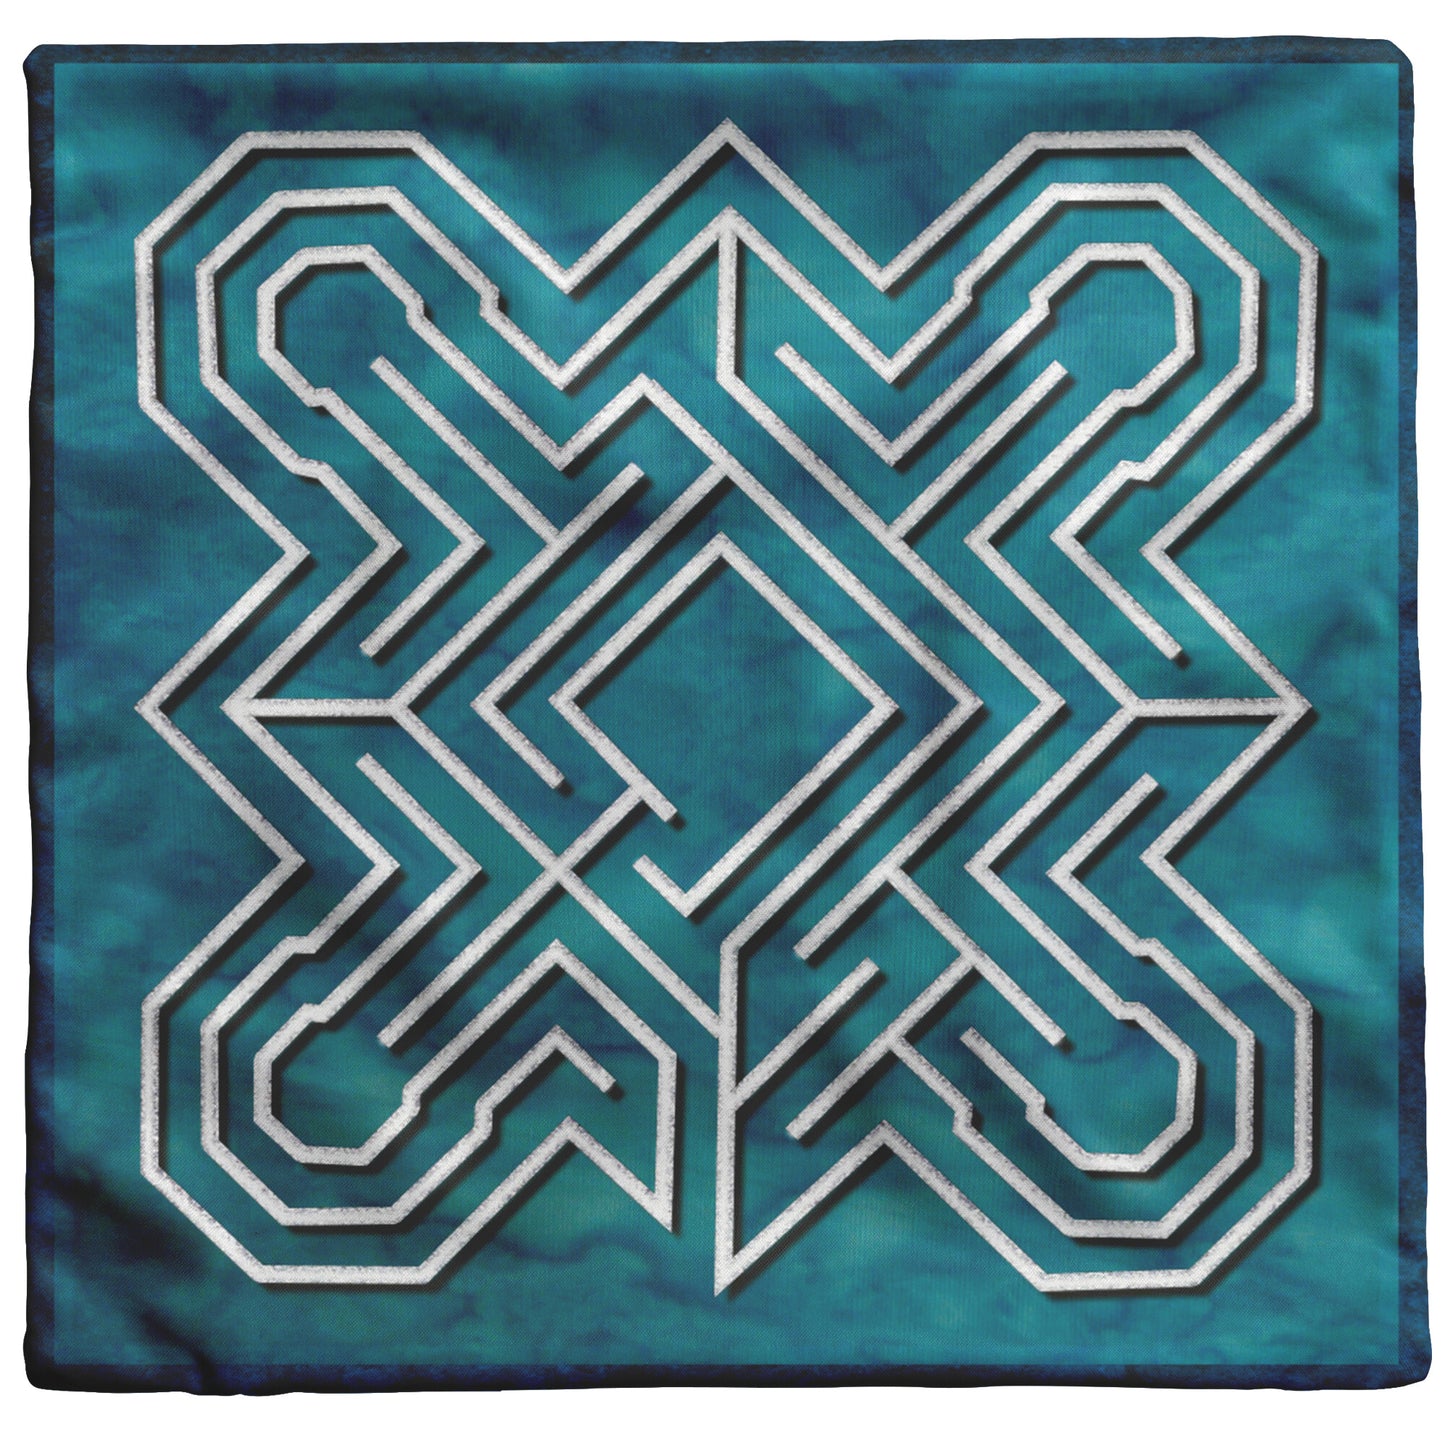 Ely Cathedral Finger Labyrinth 2-Sided Throw Pillow